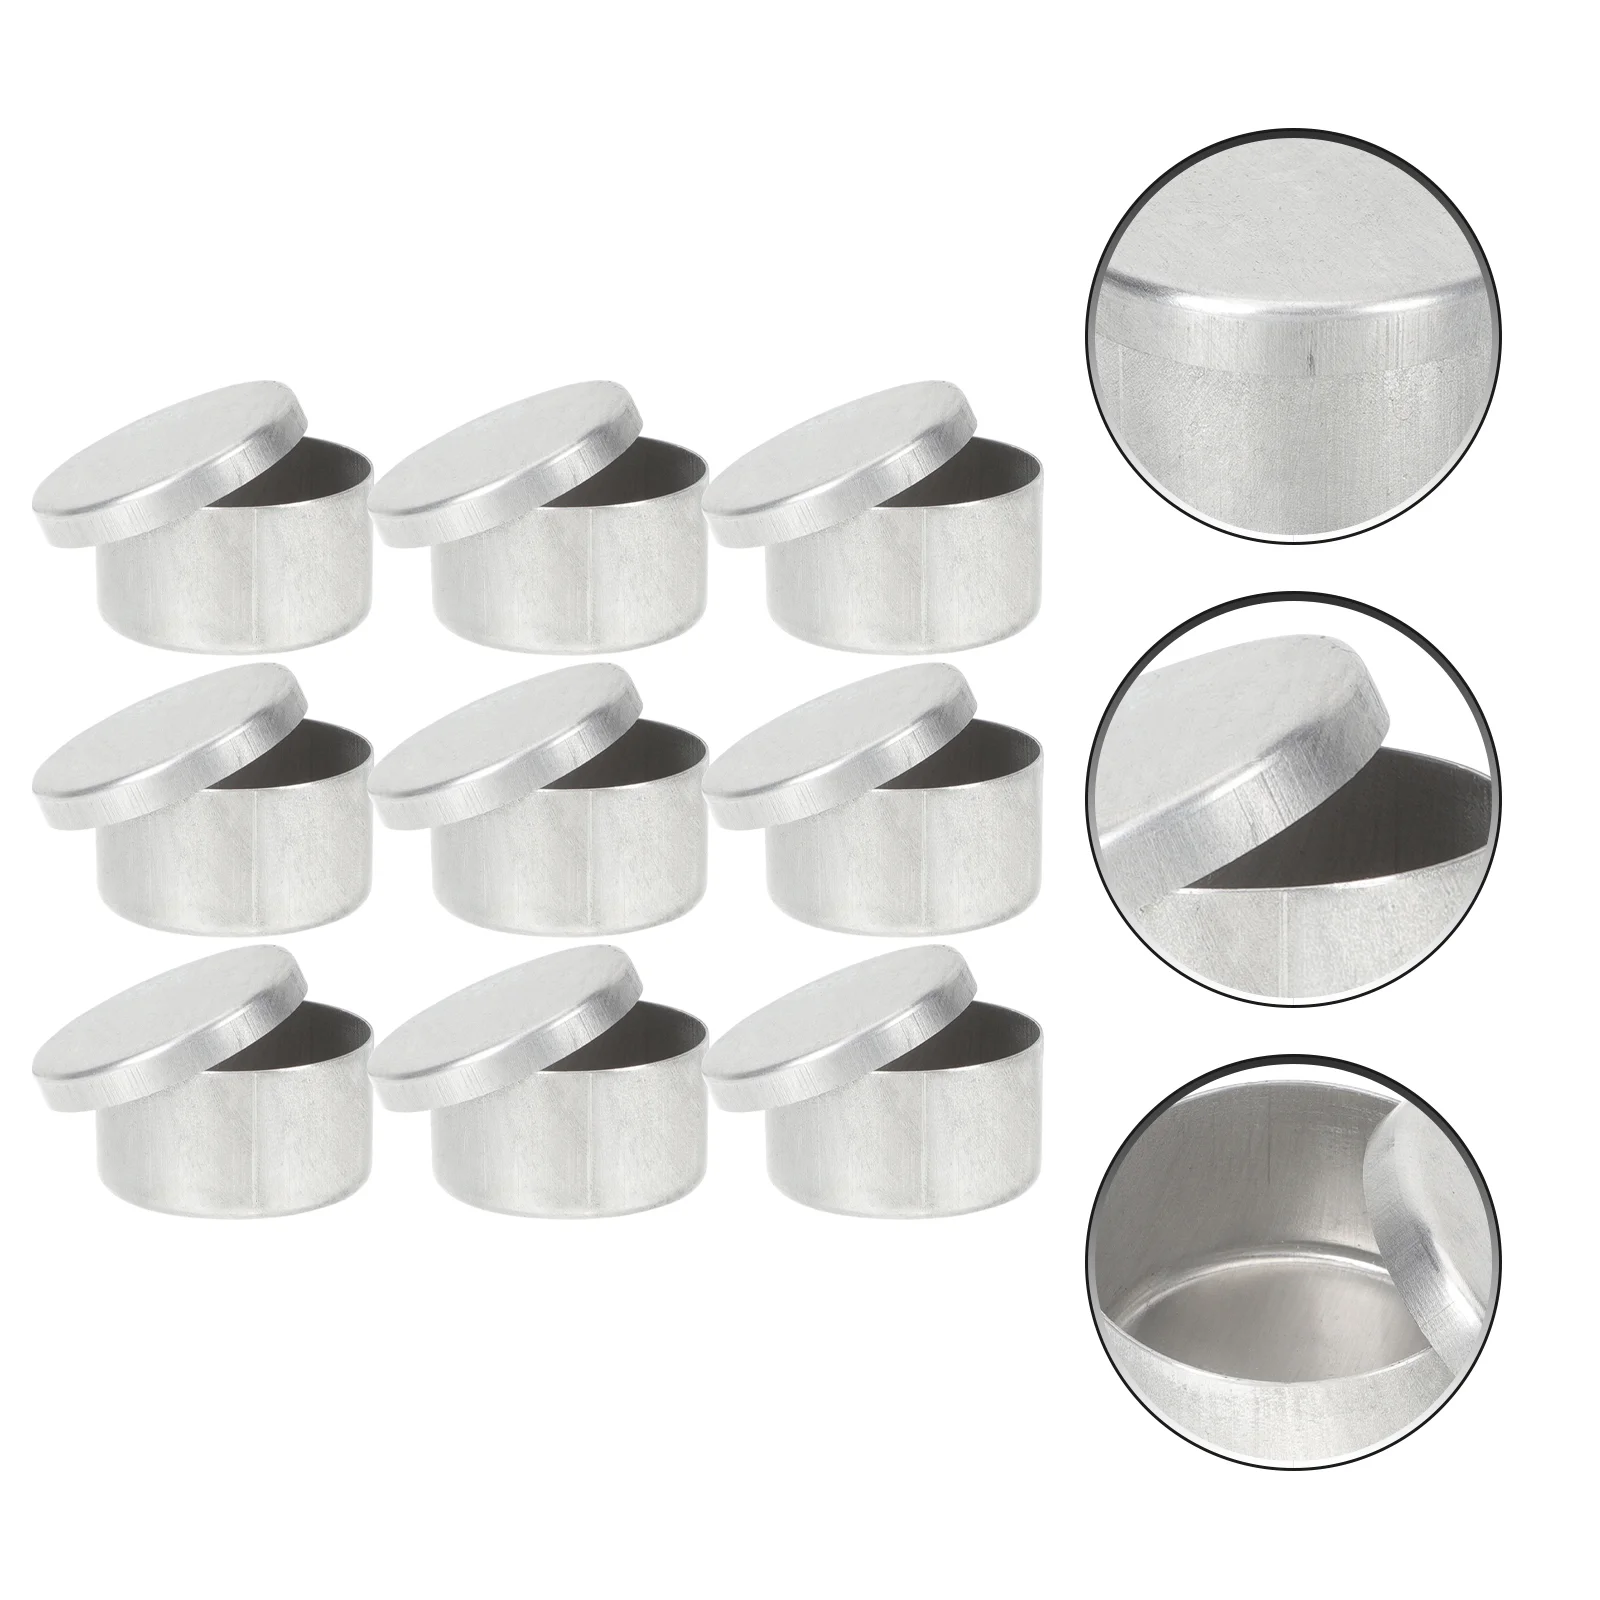 

9 Pcs Soil Sampling Box Mini Containers Lids Round Sample Weighing Holders Small Aluminum Jar Empty Jars Travel